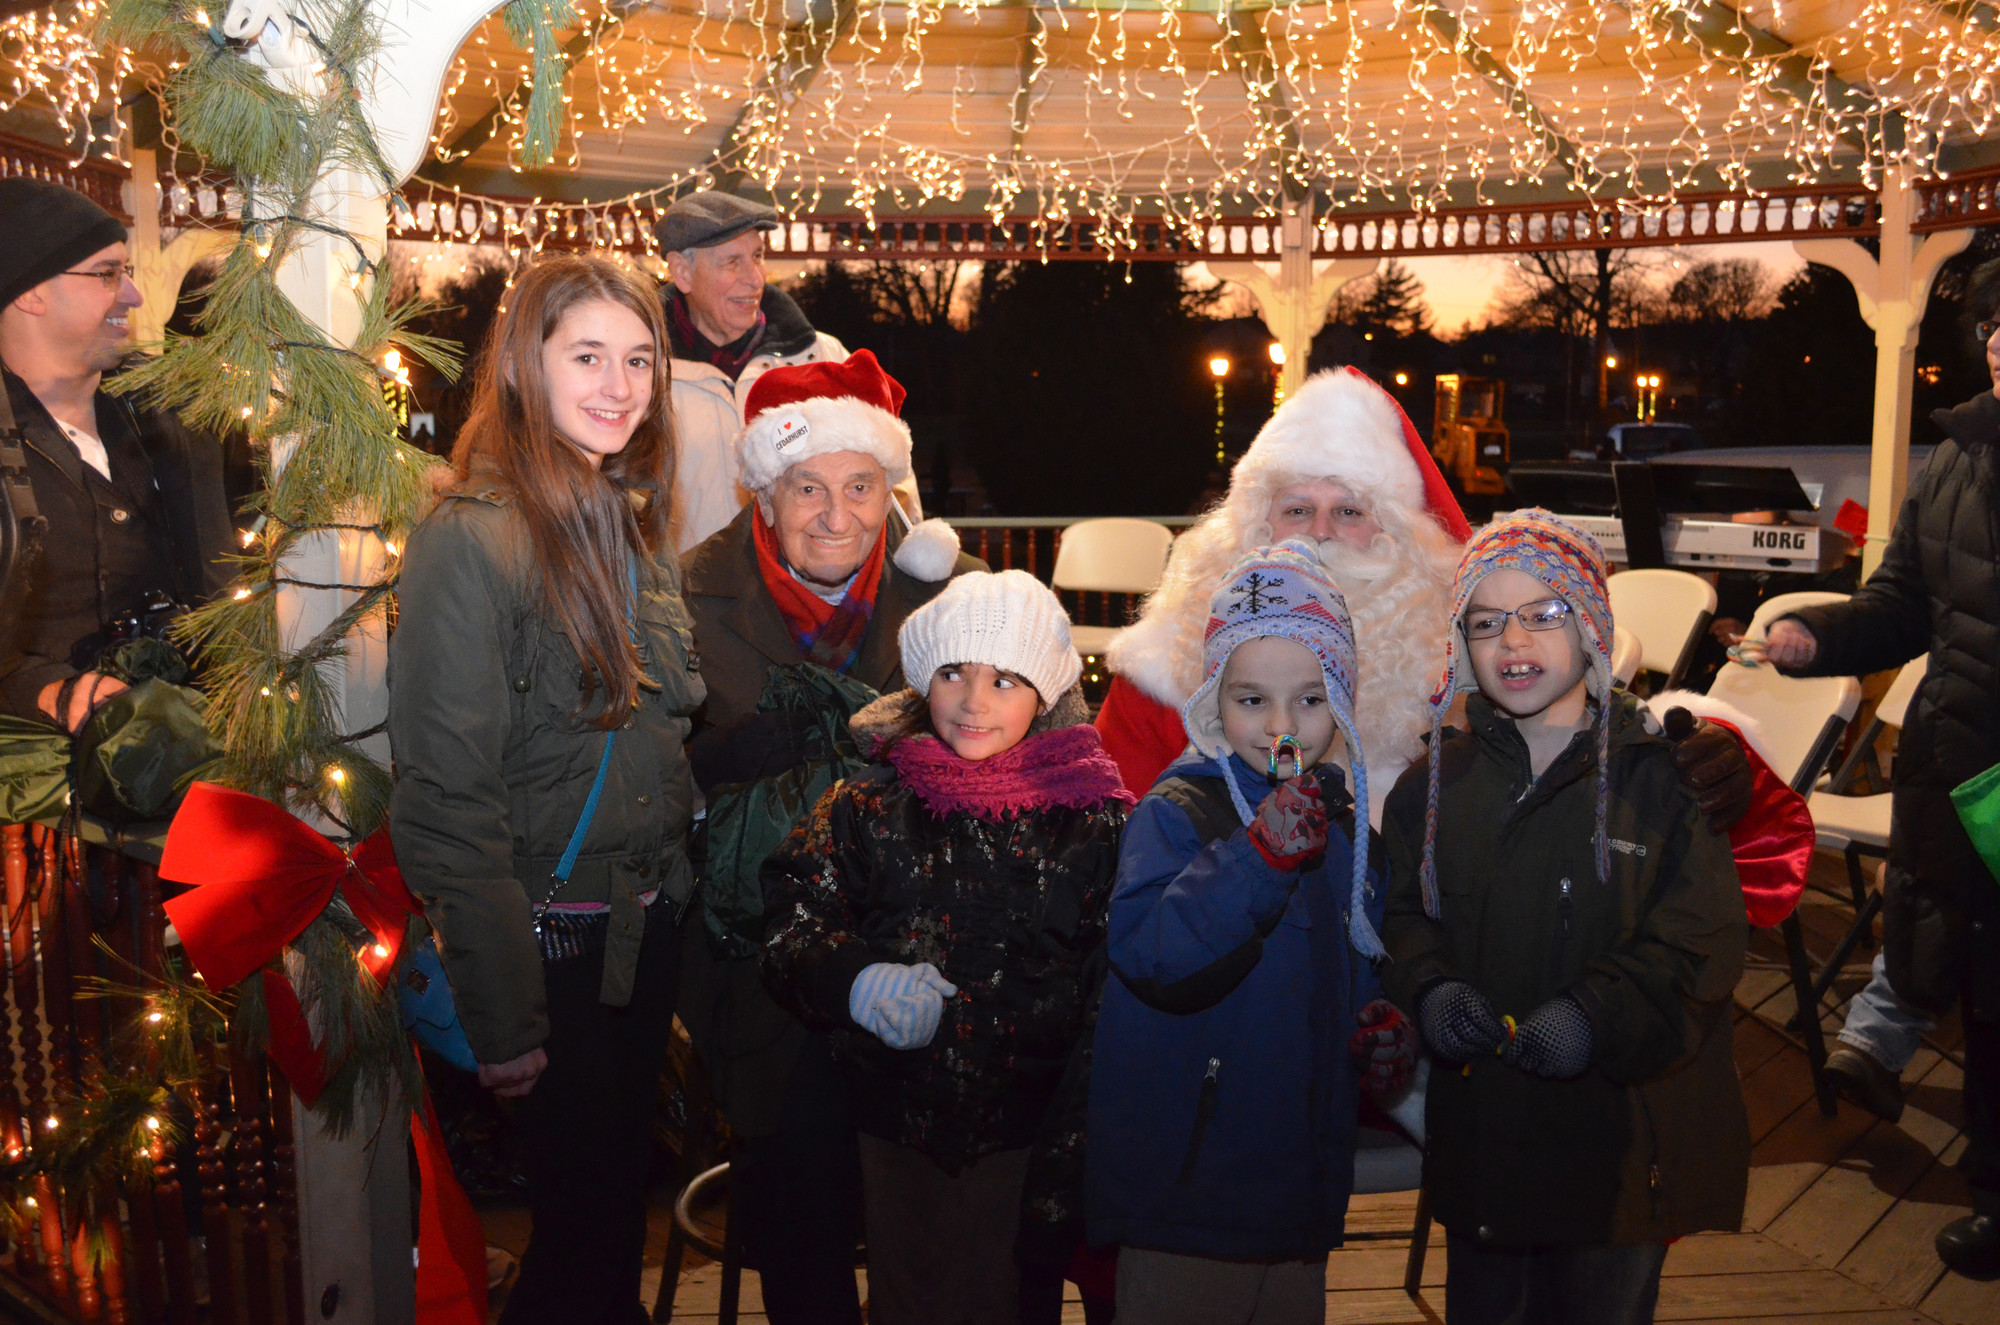 Cedarhurst Mayor Andrew Parise could usually be found in the middle of any village event. From left, at last December’s annual holiday celebration and tree lighting, were Silvia Carlo, Parise, Isabela Iasevoli, Mark and Matthew Iacomino, and Santa Claus.